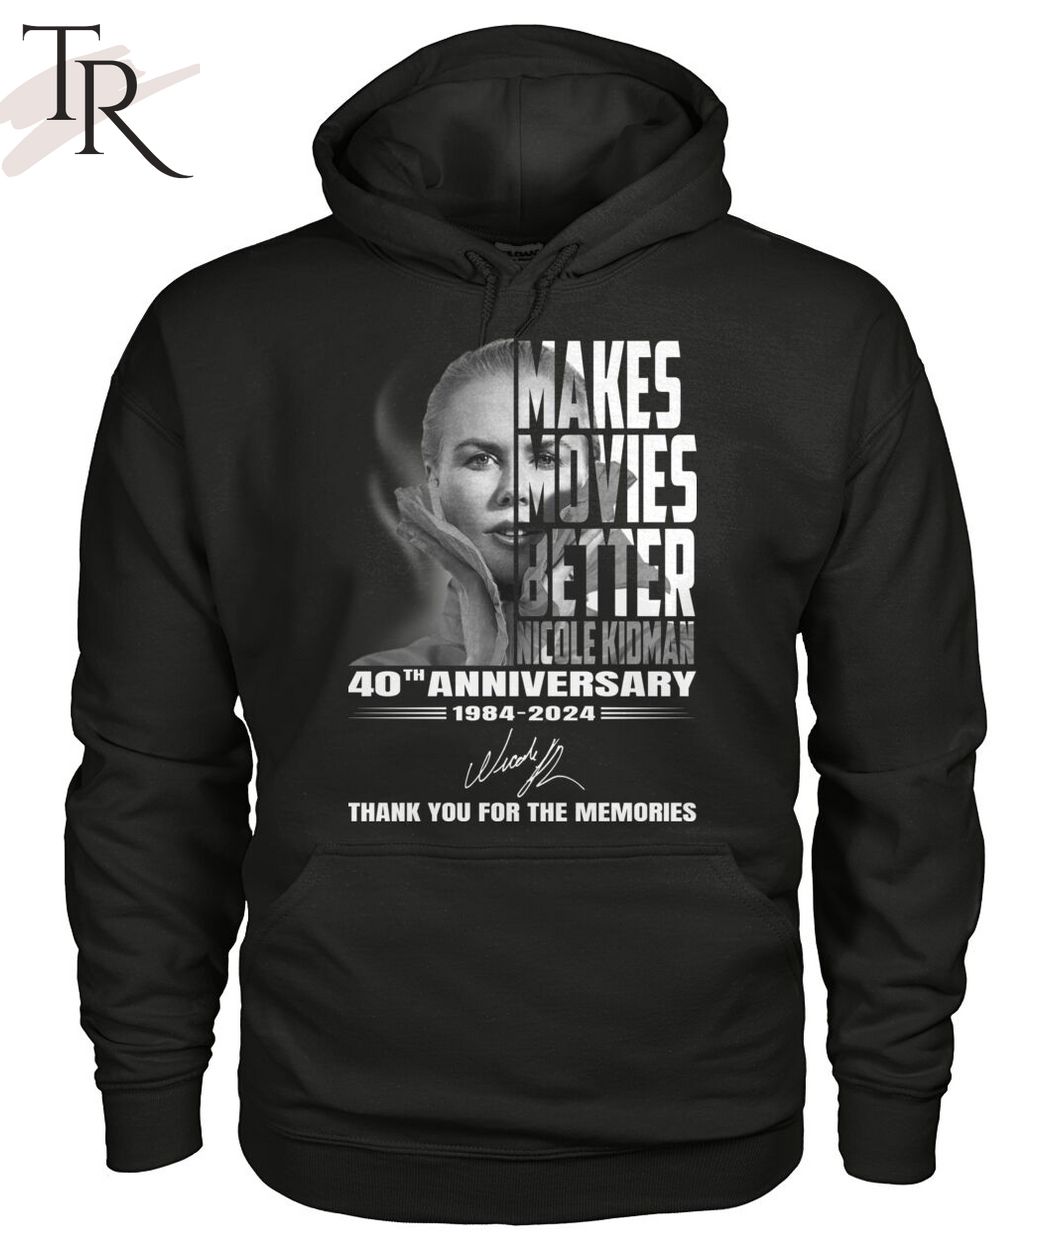 Makes Movies Better Nicole Kidman 40th Anniversary 1984-2024 Thank You For The Memories T-Shirt